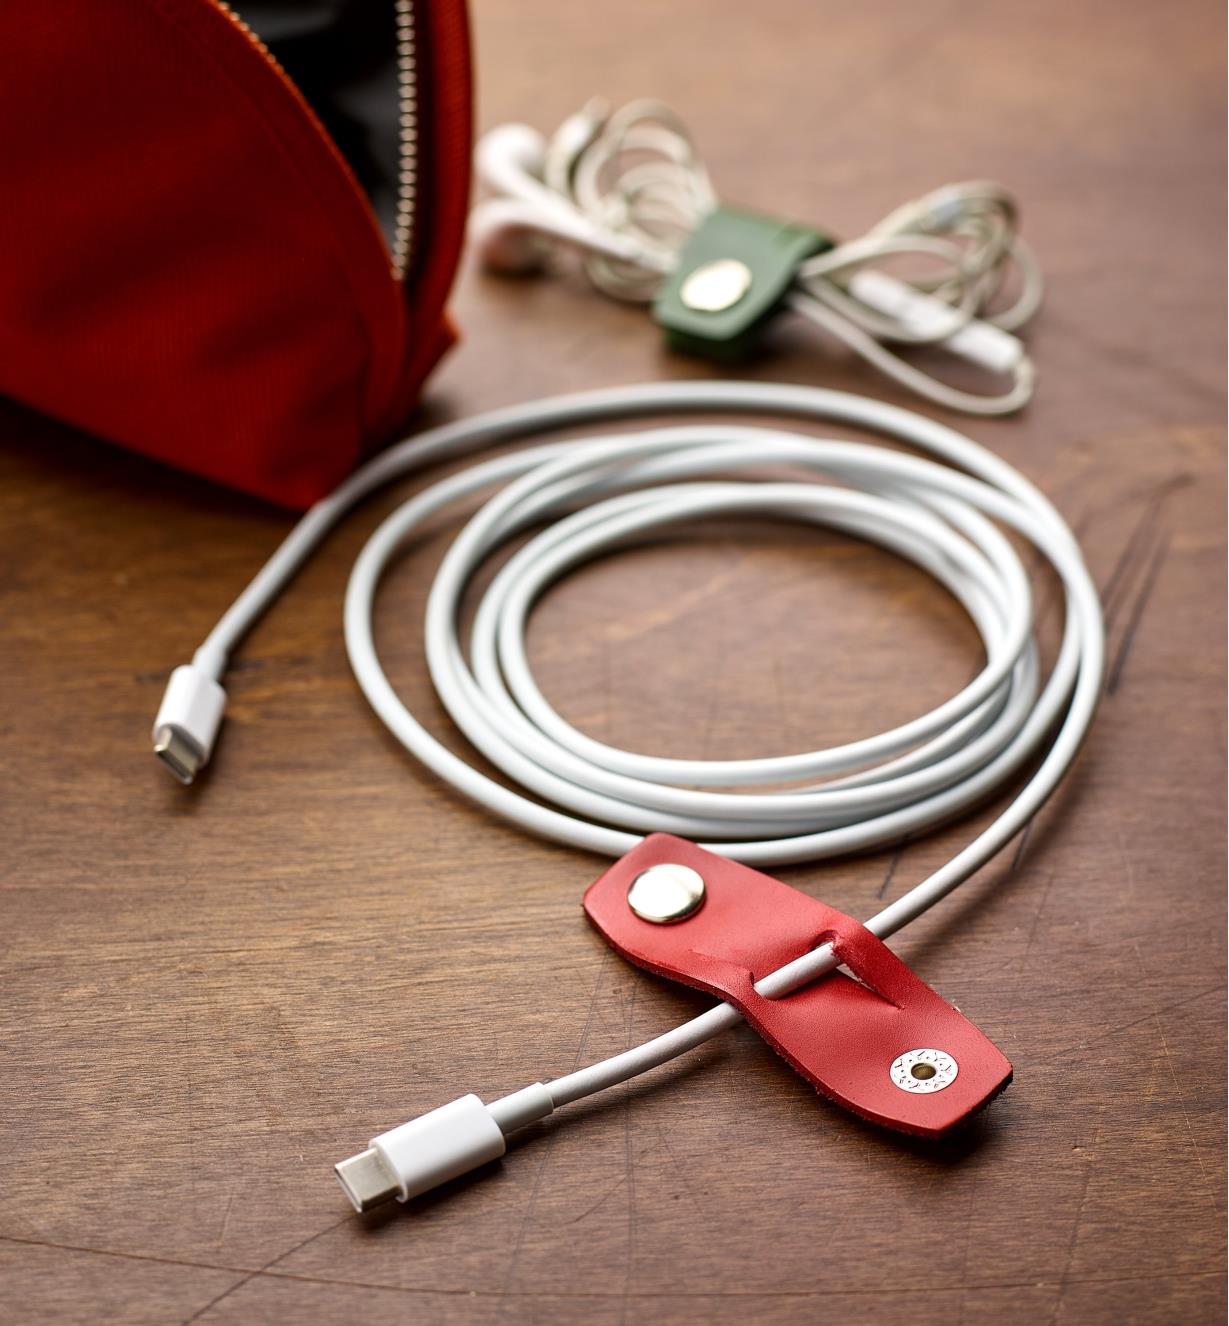 Electronics cord with an open Leather Cord Keeper attached to it